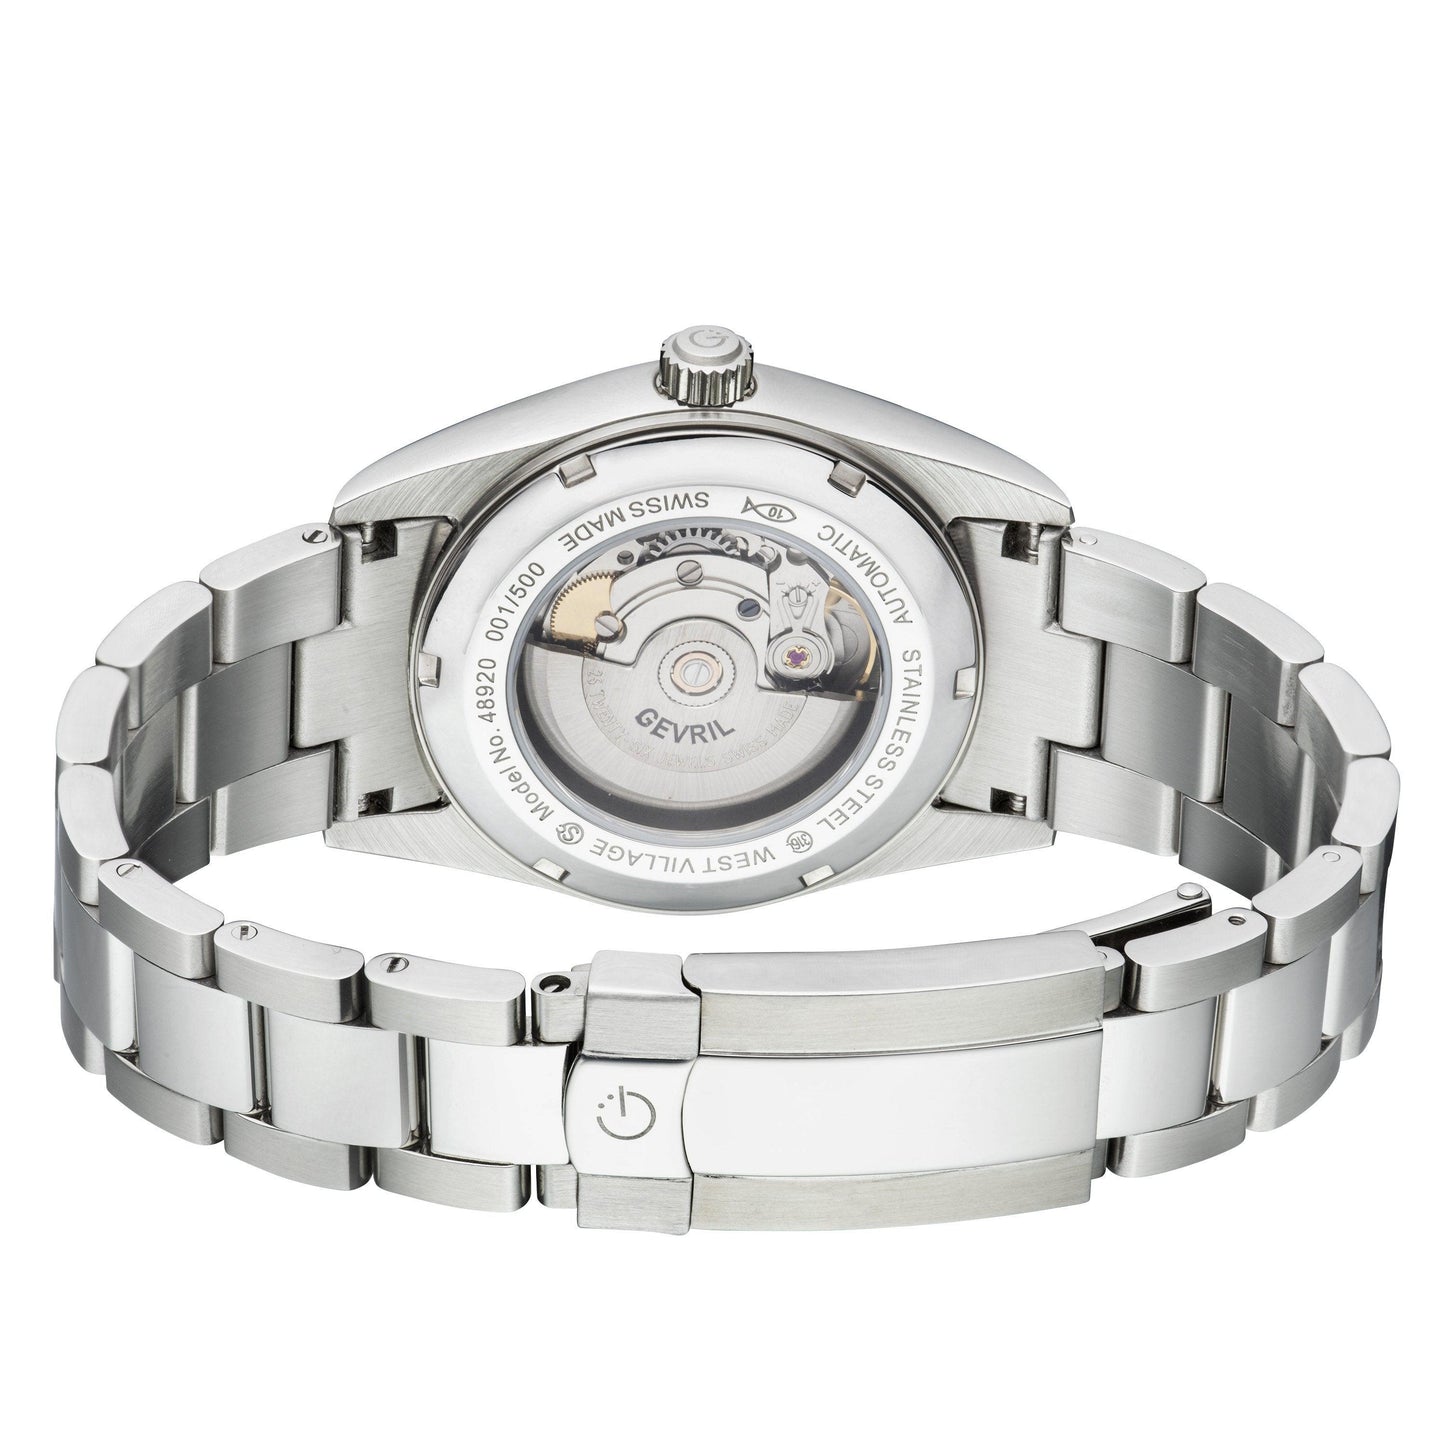 Gevril-Luxury-Swiss-Watches-Gevril West Village - Automatic-48920